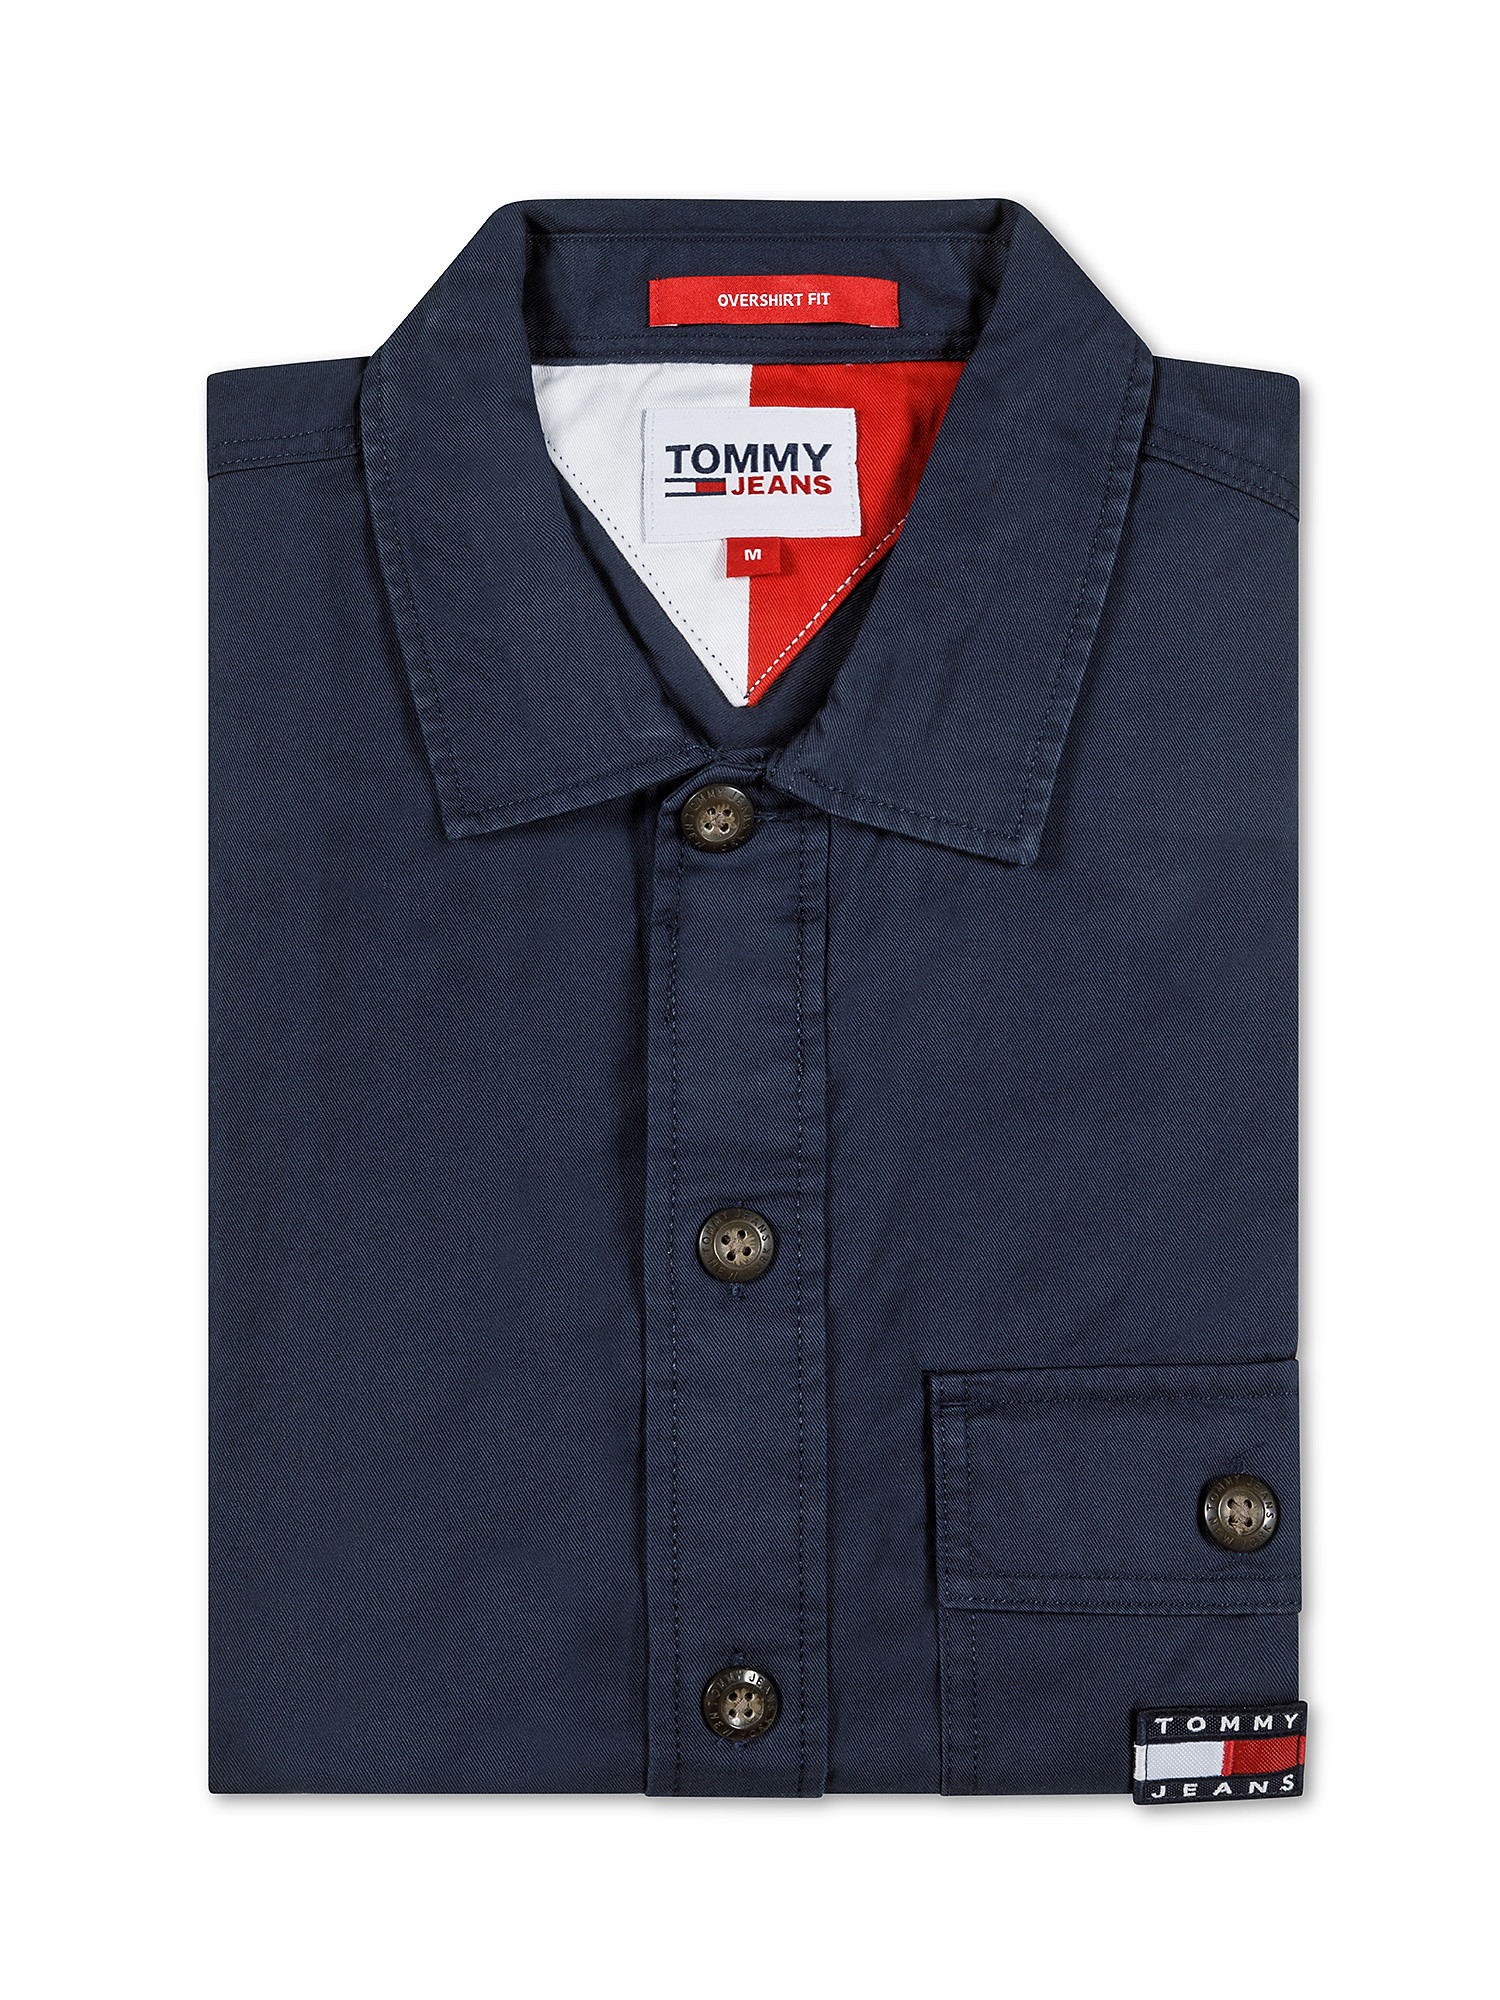 Tommy Jeans - Camicia in cotone con logo, Blu scuro, large image number 2